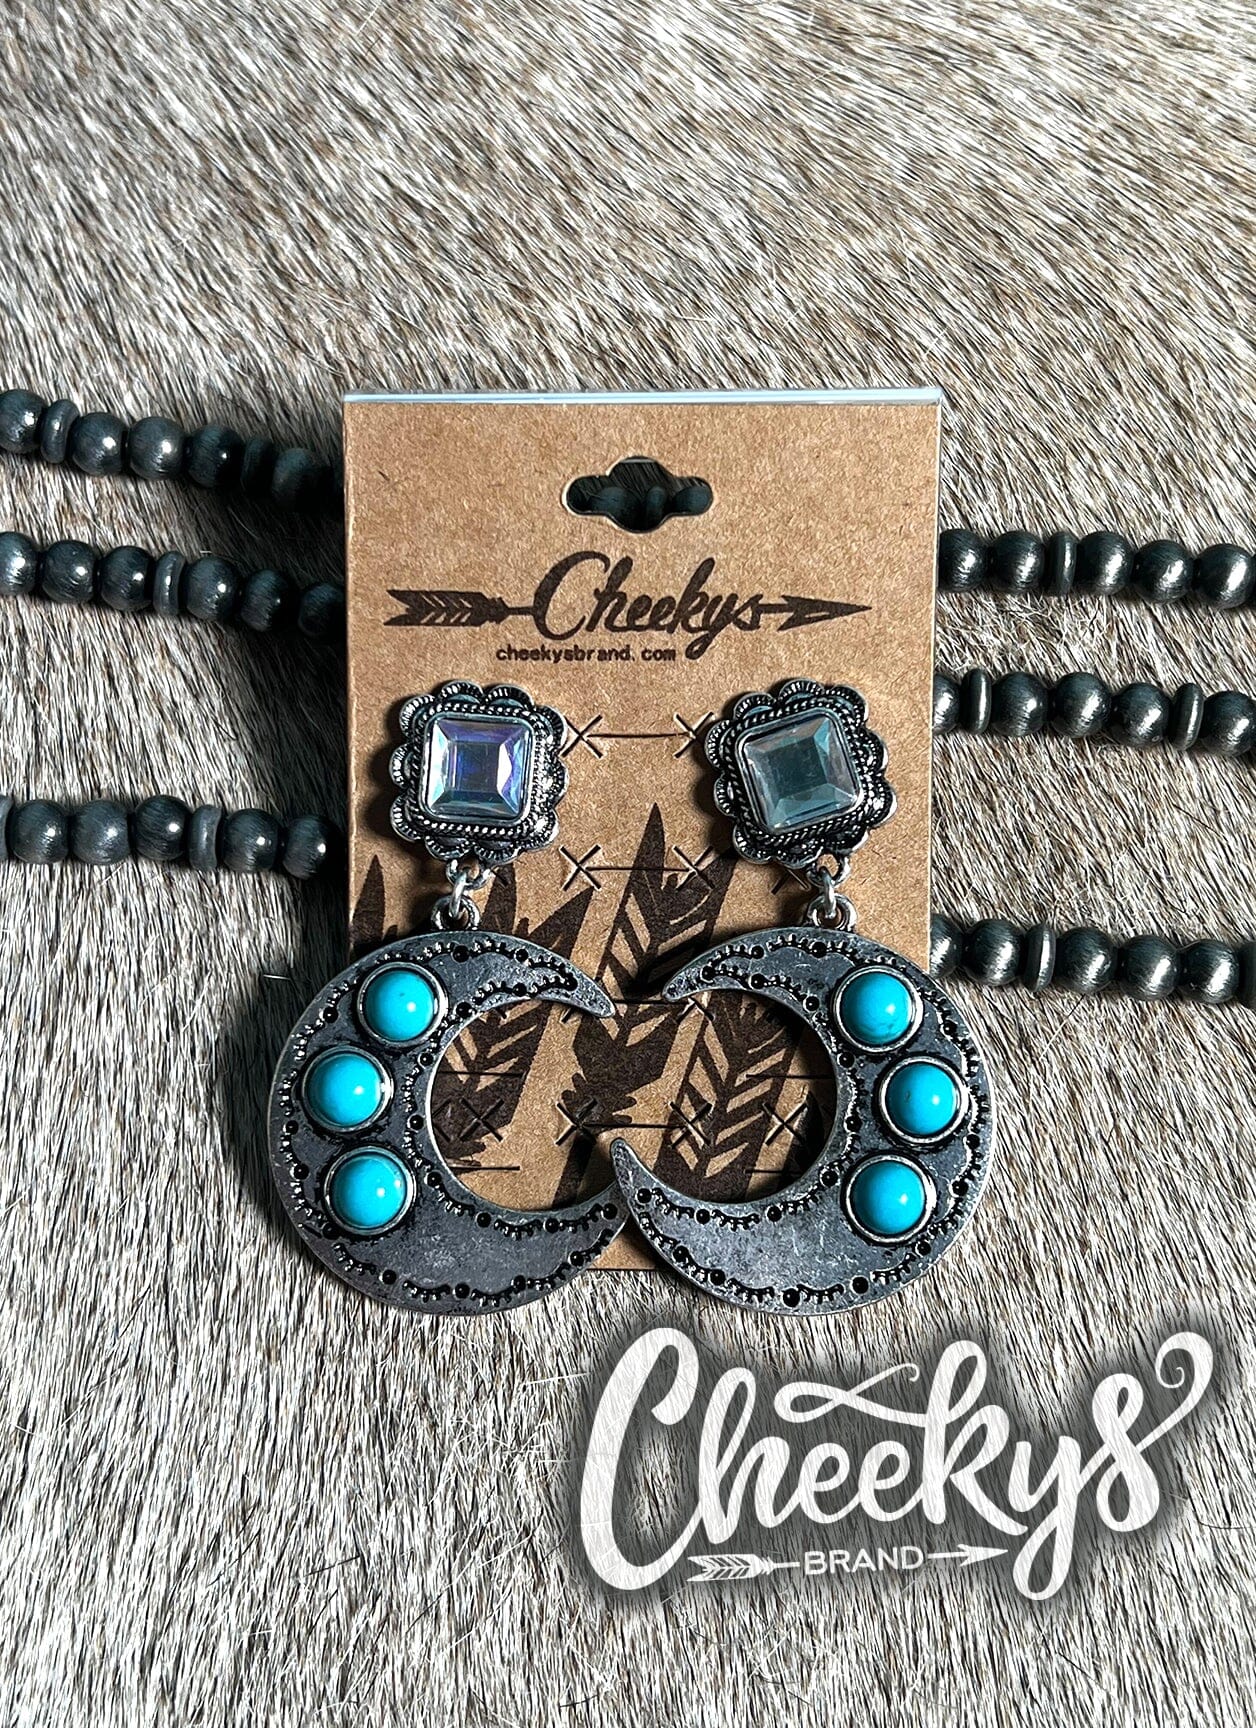 Turquoise Stone In The Half Moon Post Earrings Cheekys Brand 